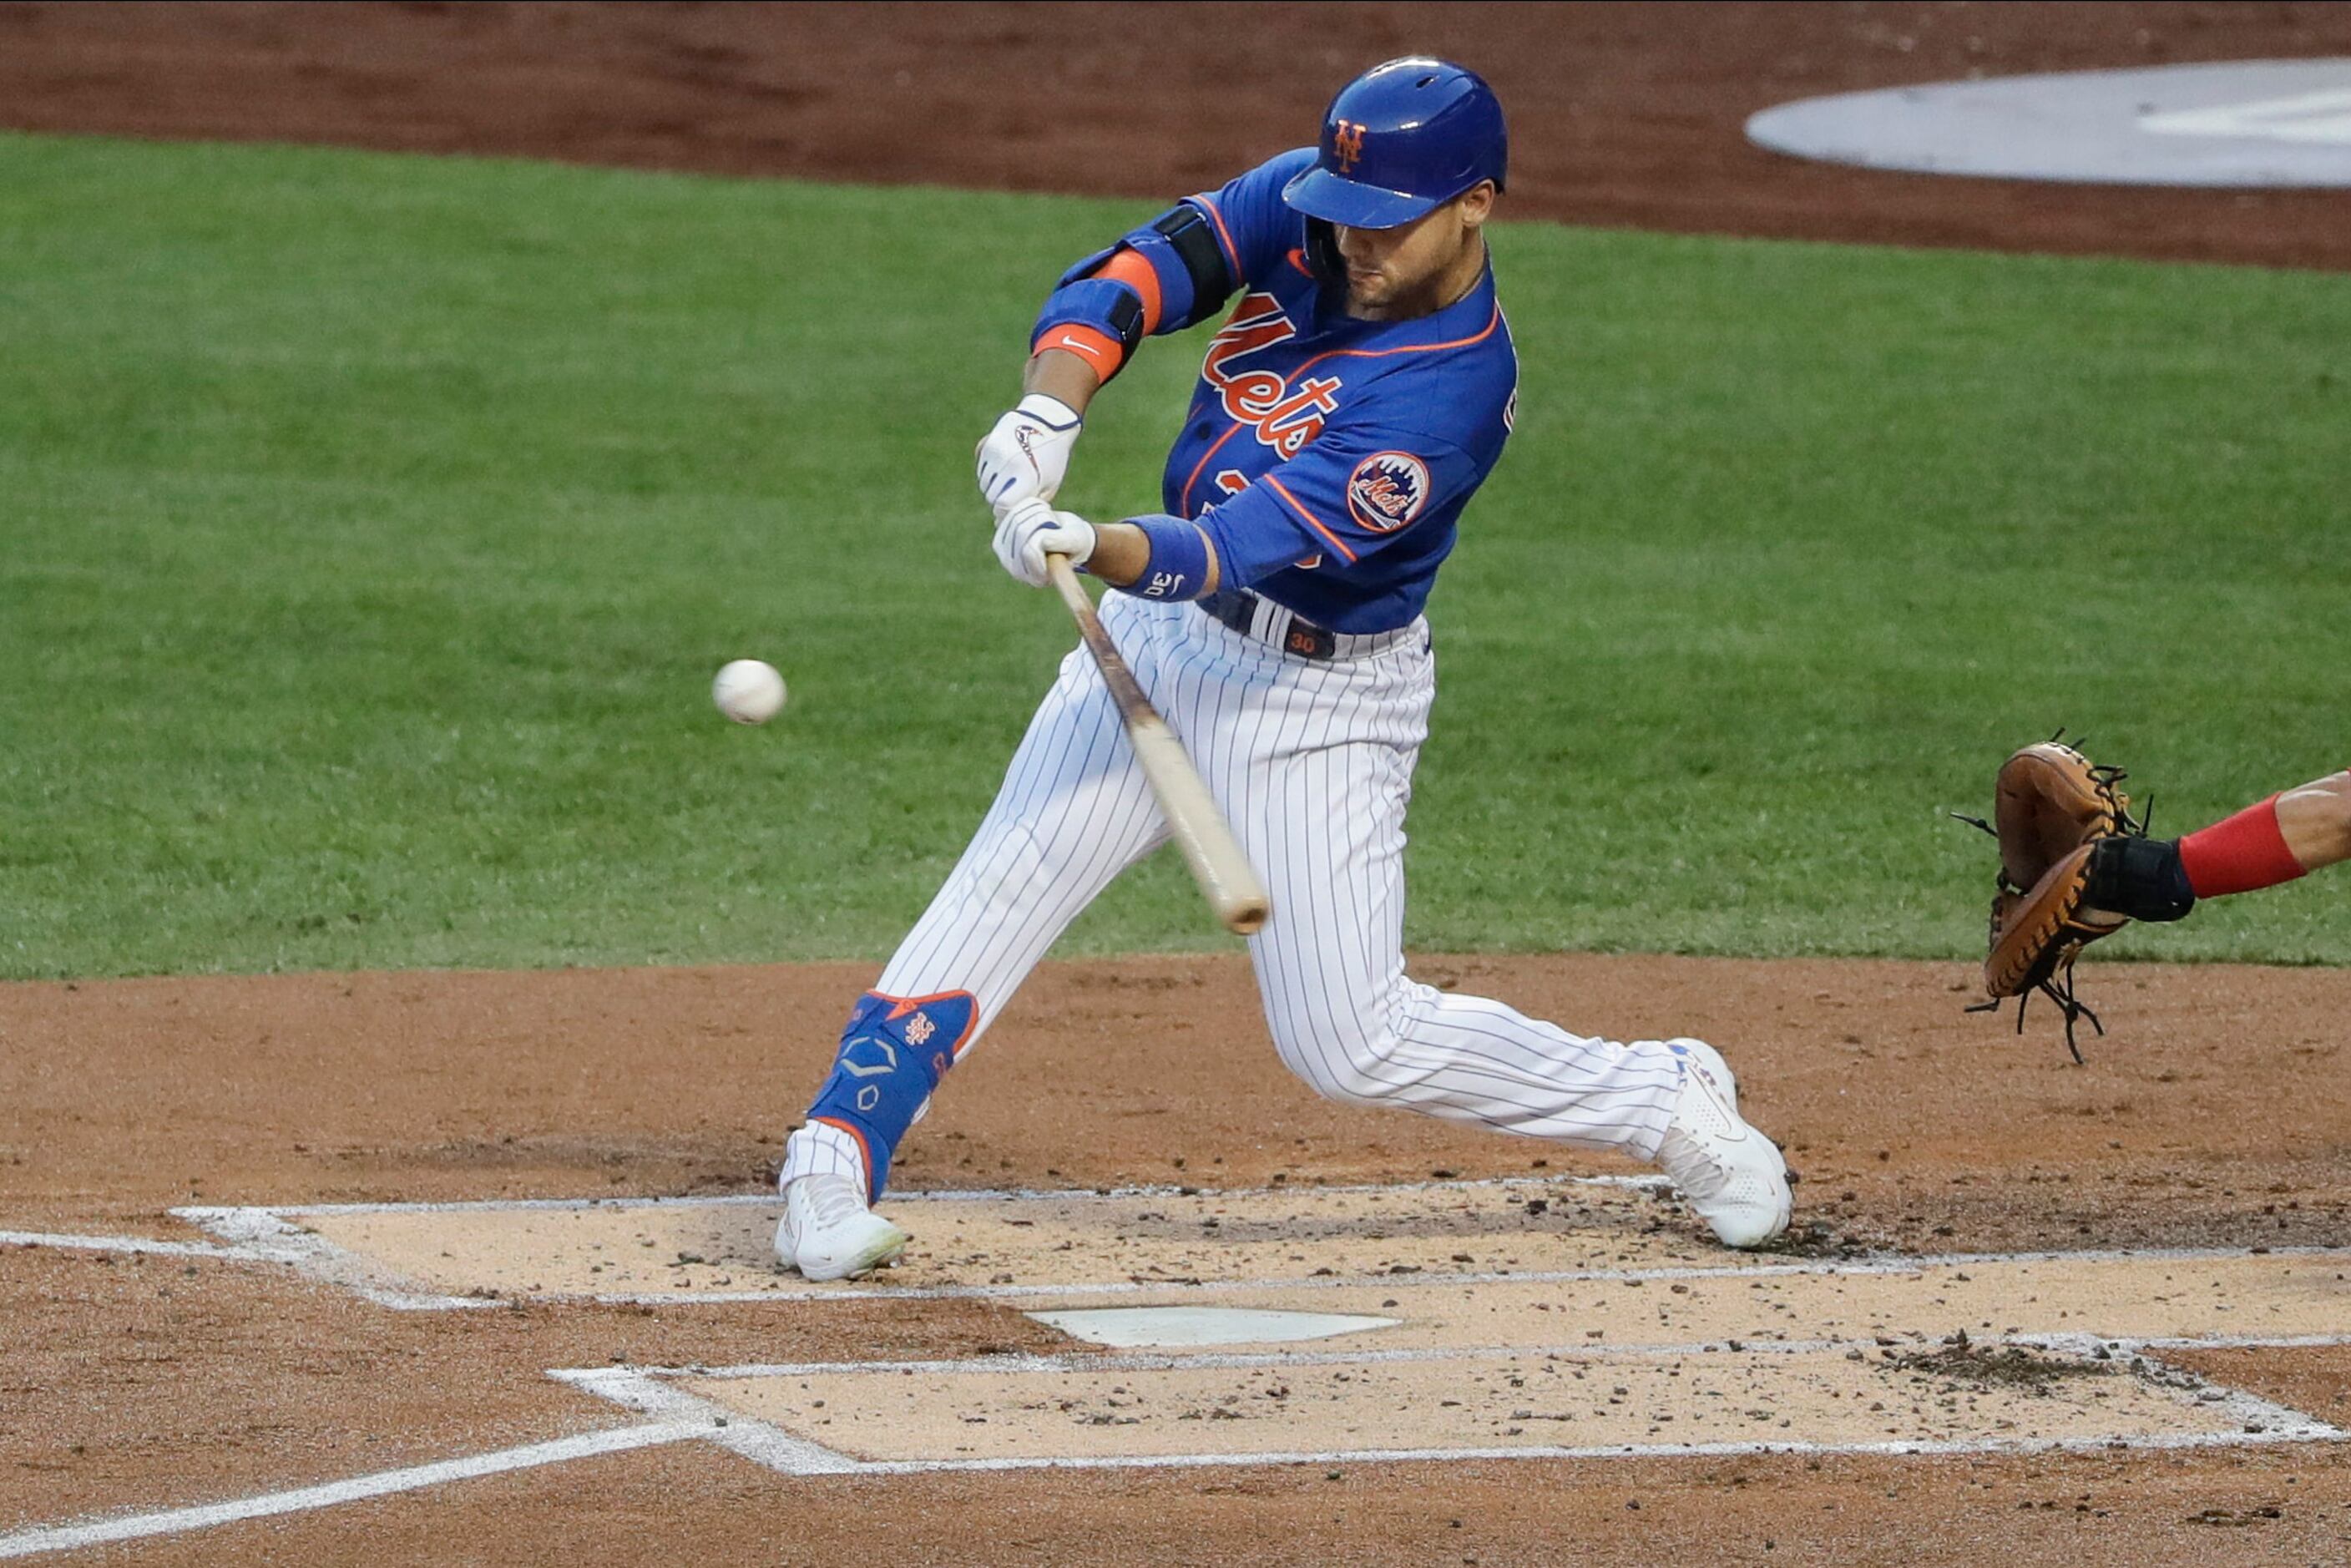 Michael Conforto seeks redemption with Giants, closure from Mets